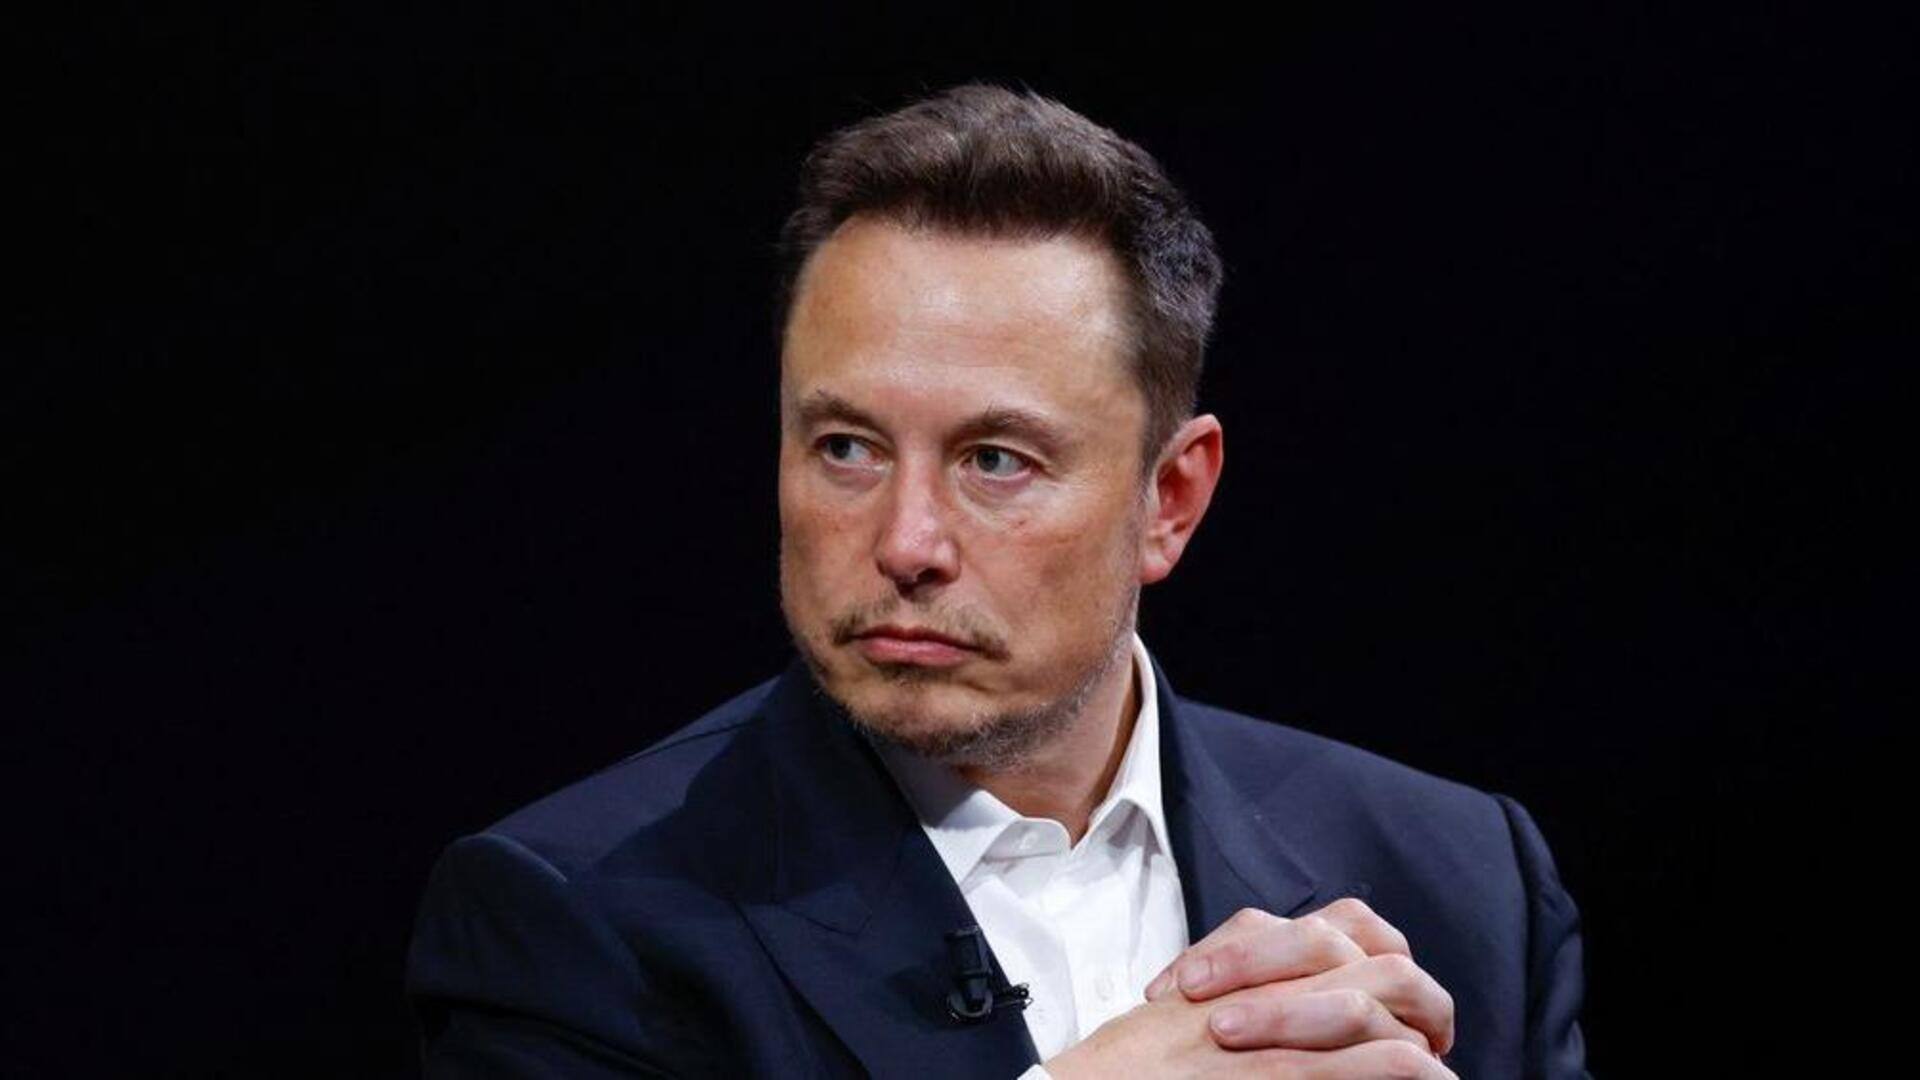 AI Safety Summit's goal is creating a third-party referee: Musk